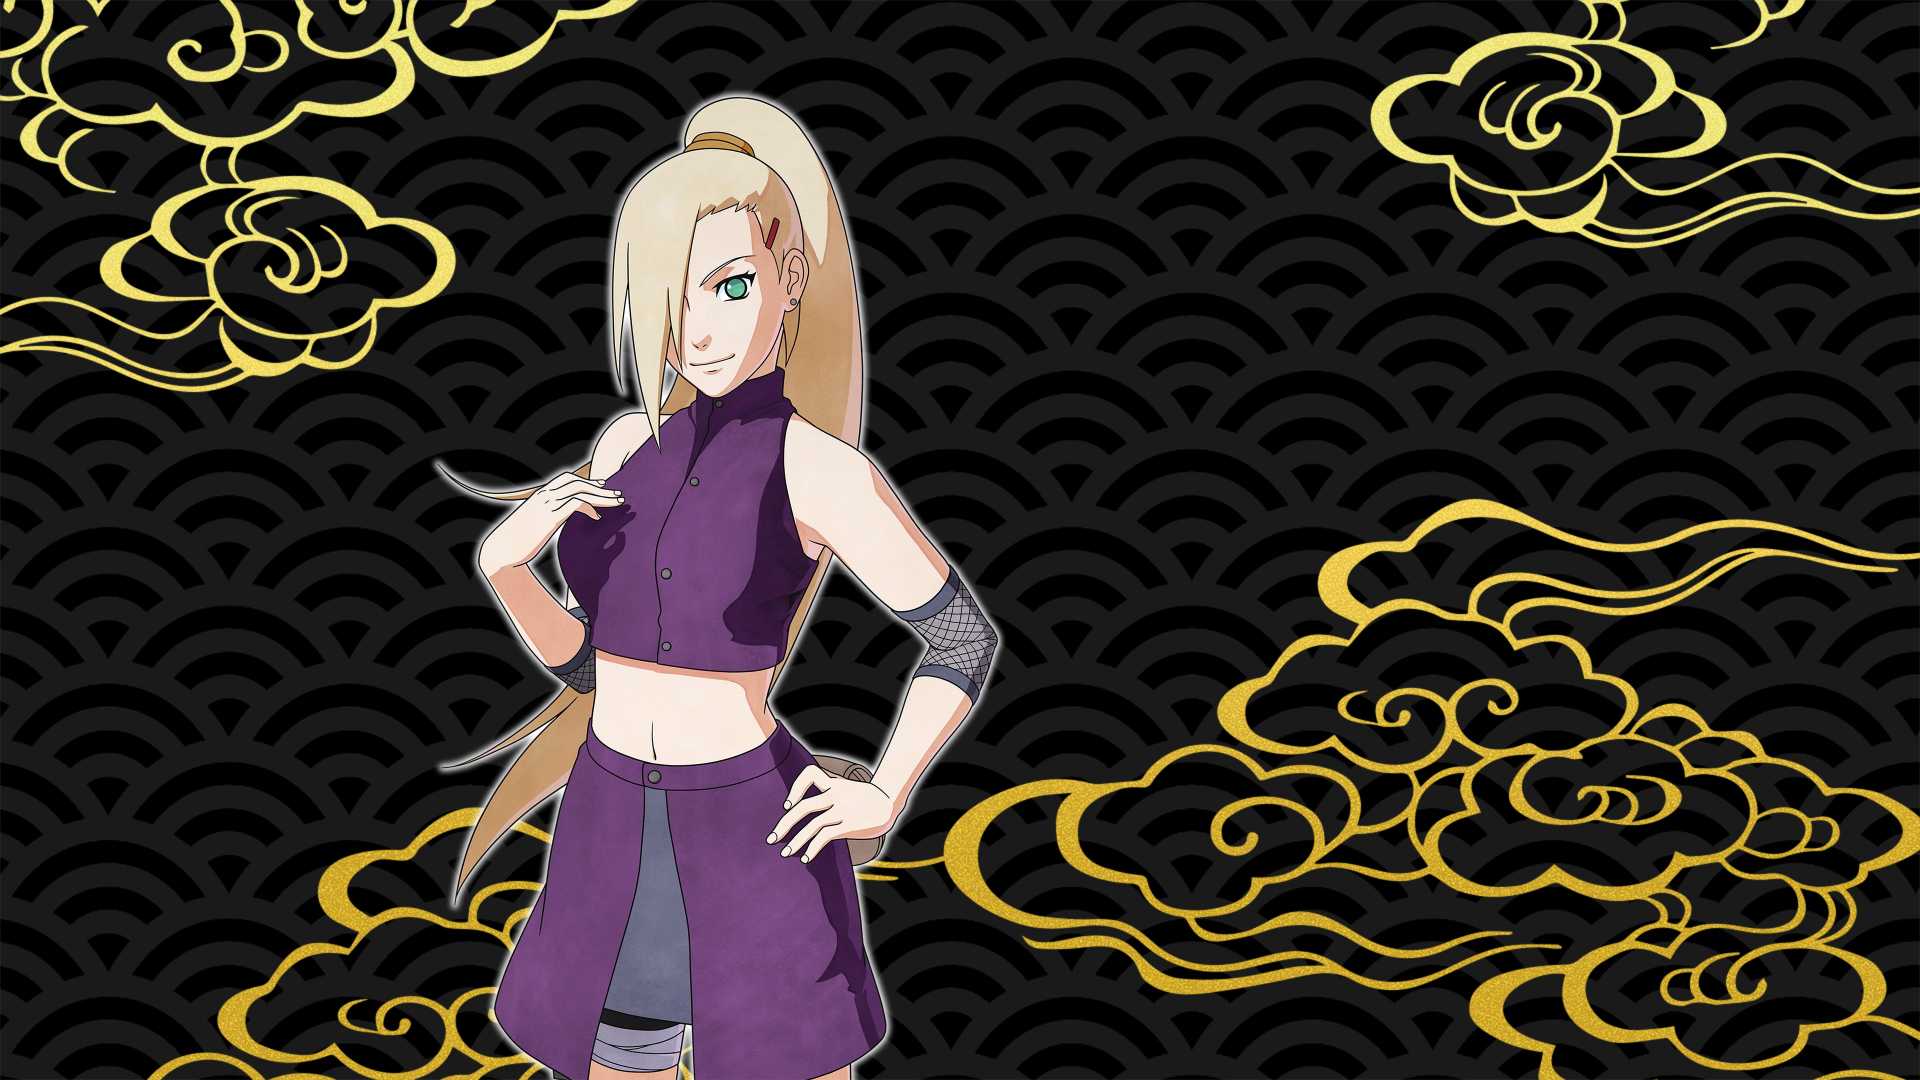 What's Ino's personality in the Naruto anime and manga? - Quora